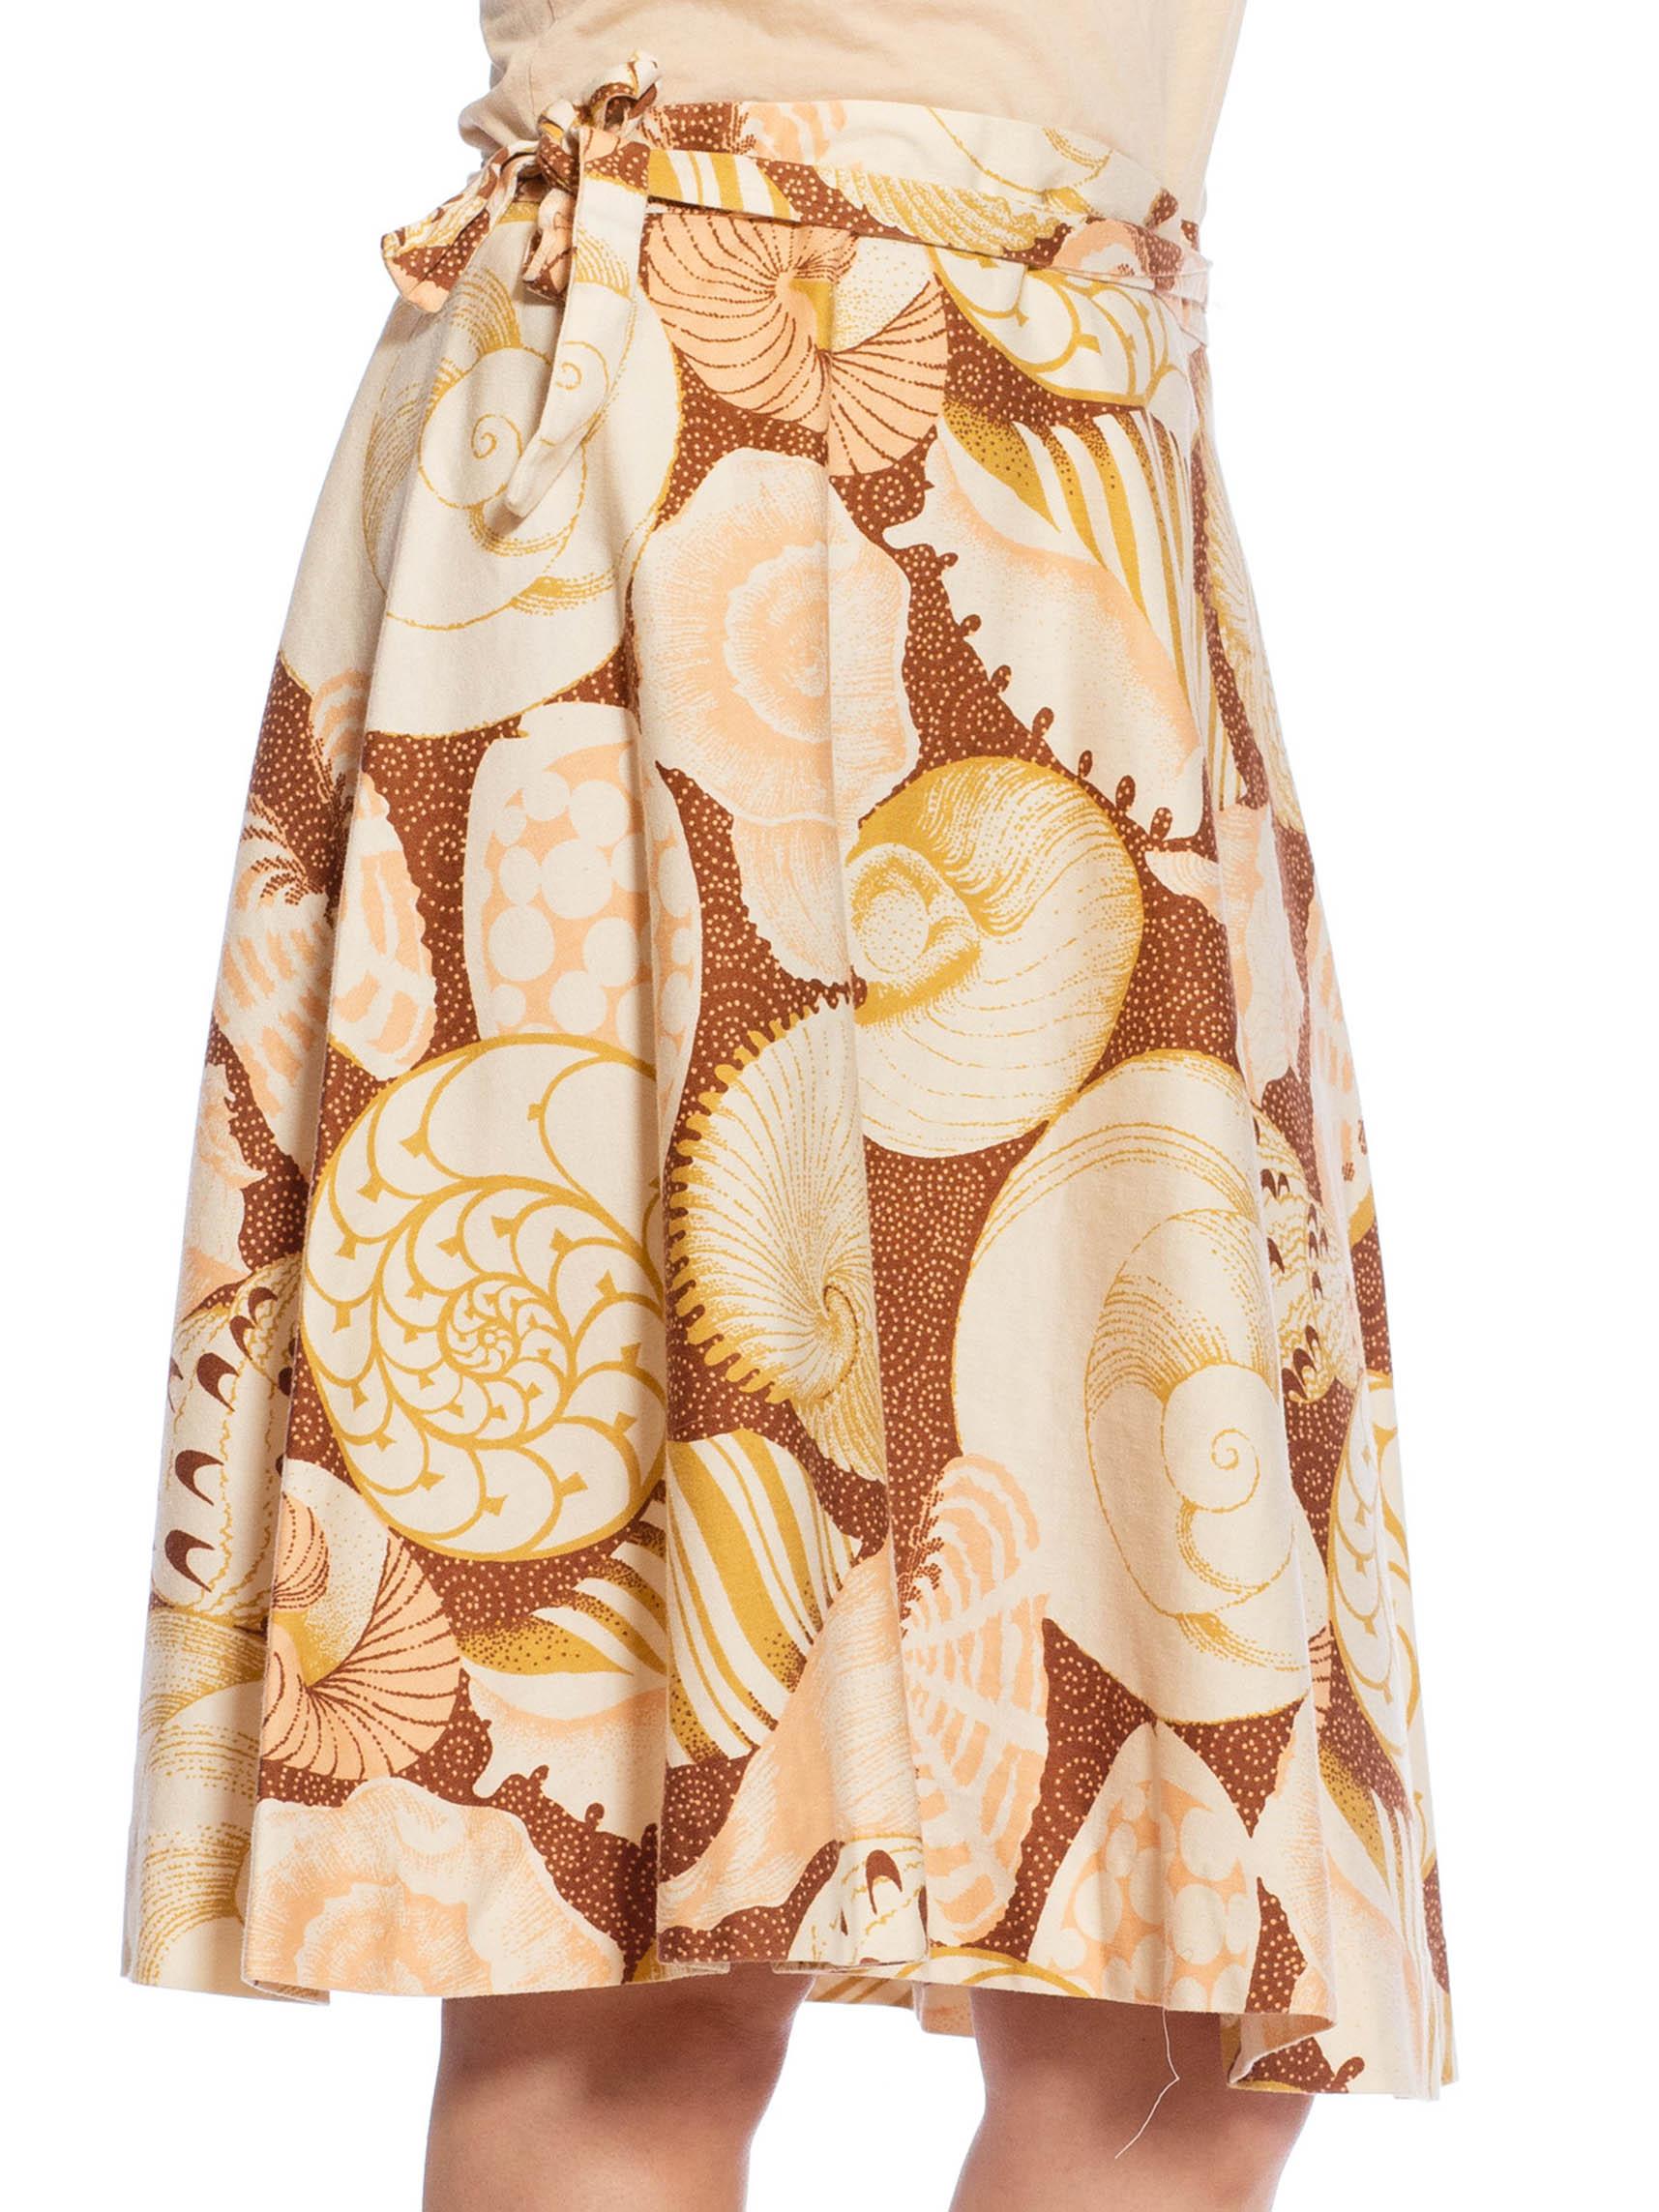 1970S Beige Cotton Seashell Printed Wrap Skirt For Sale 4